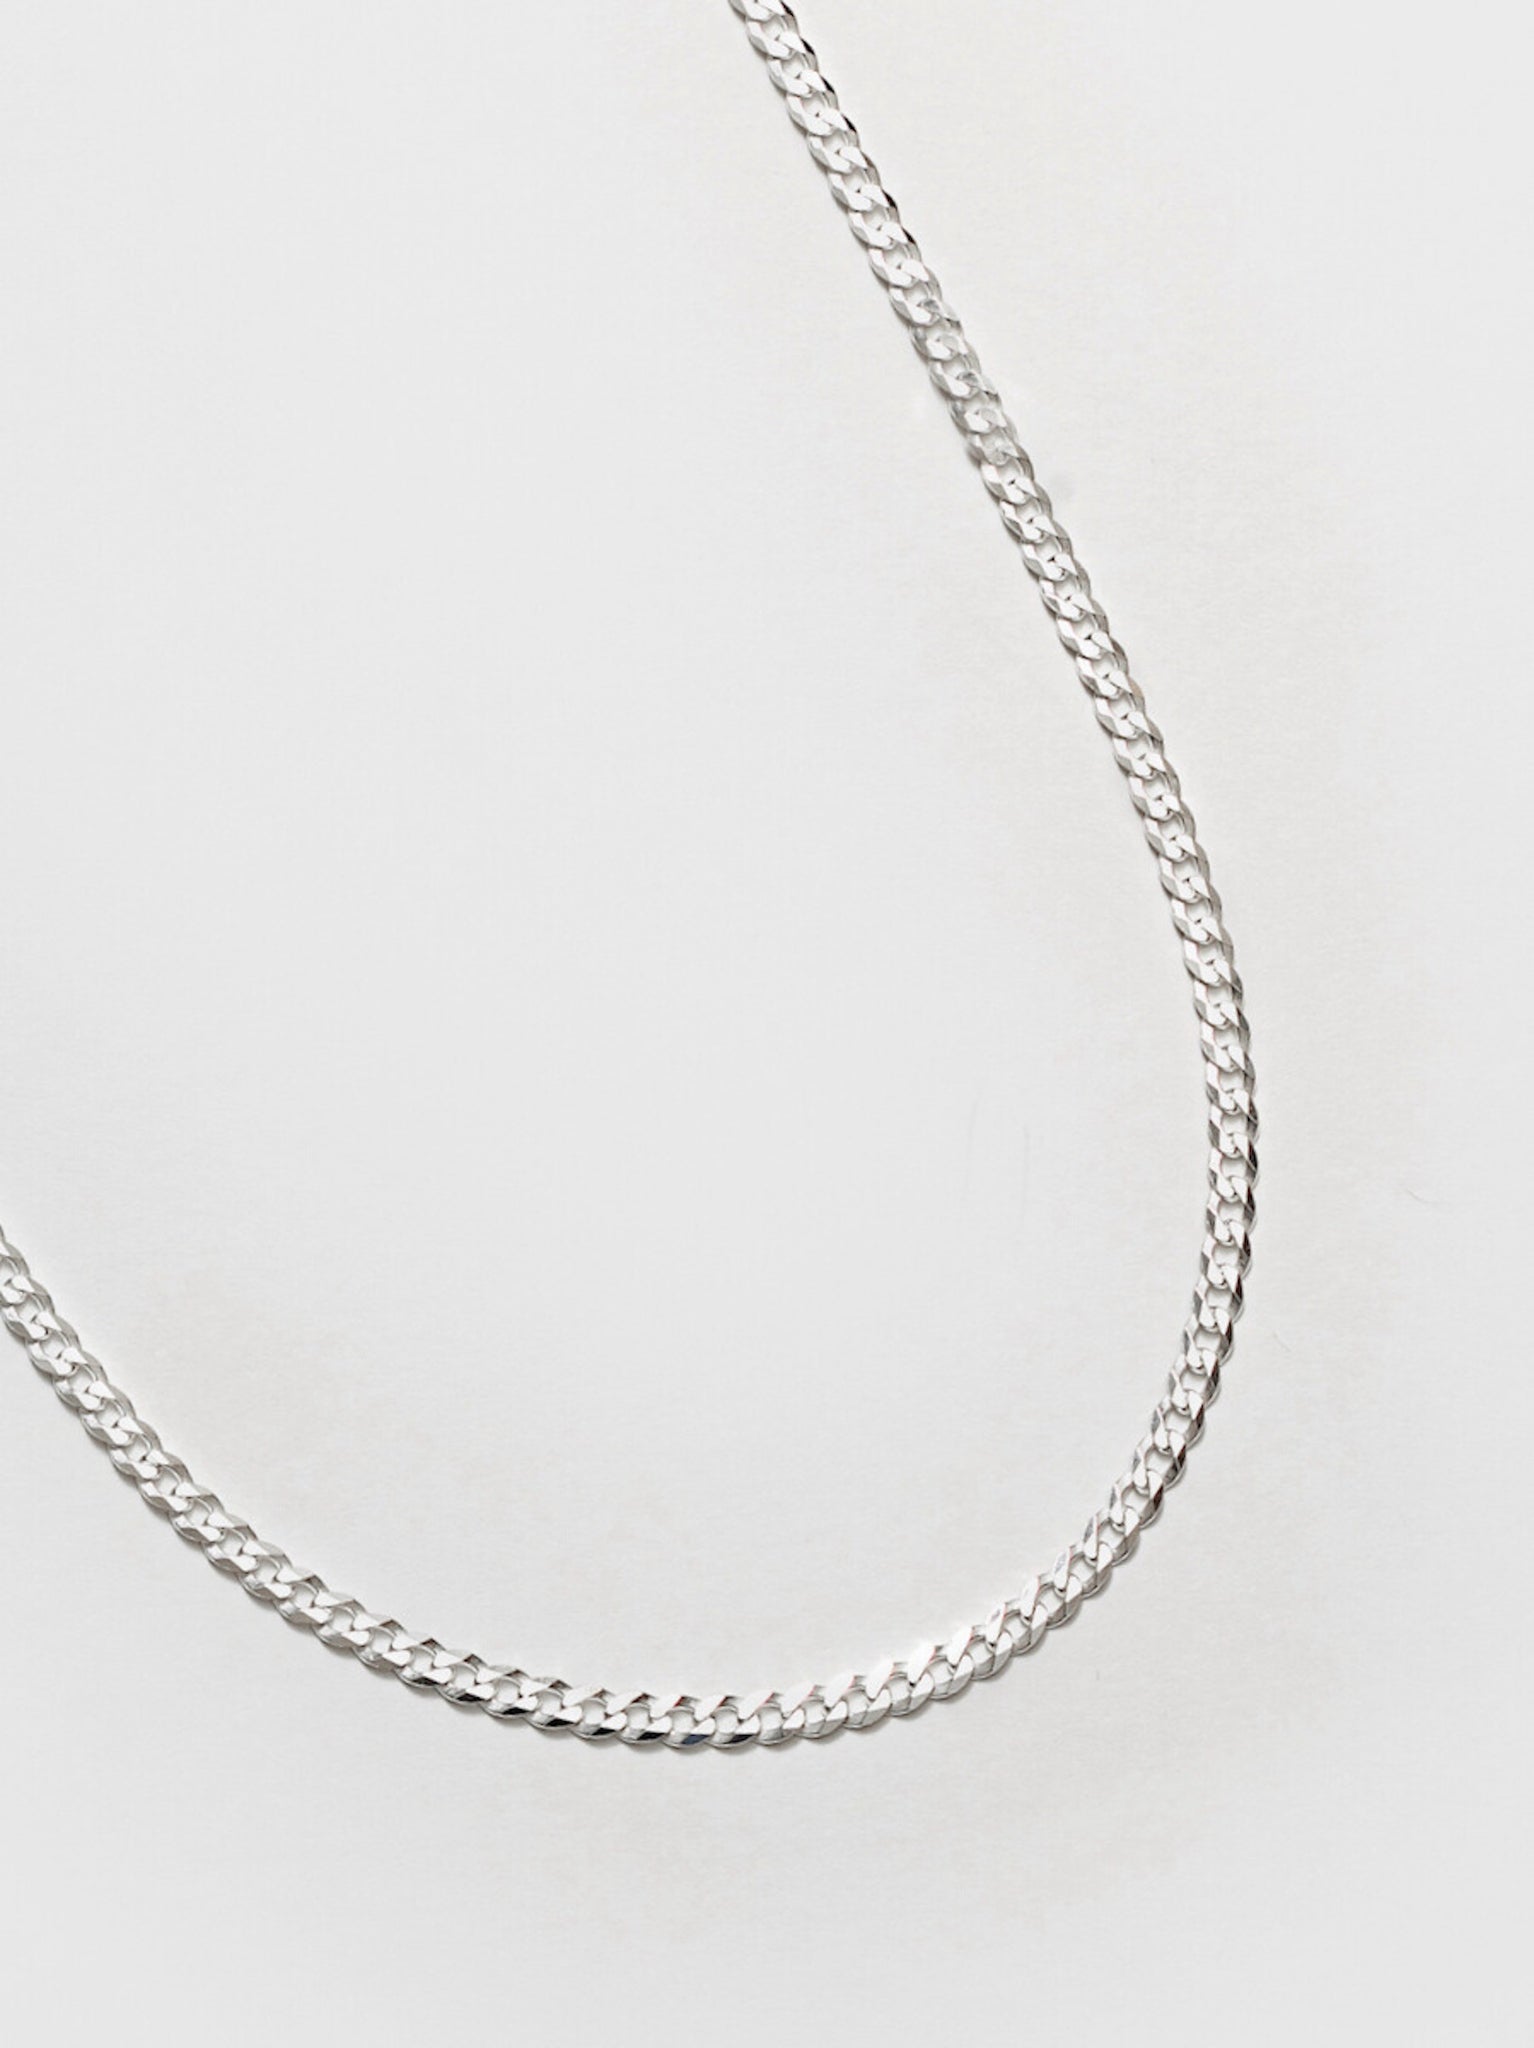 Wolf Circus Curb Chain Necklace Sterling Silver Diamond Cut | Liam Necklace in Sterling Silver-Necklaces-wolfcircus.com